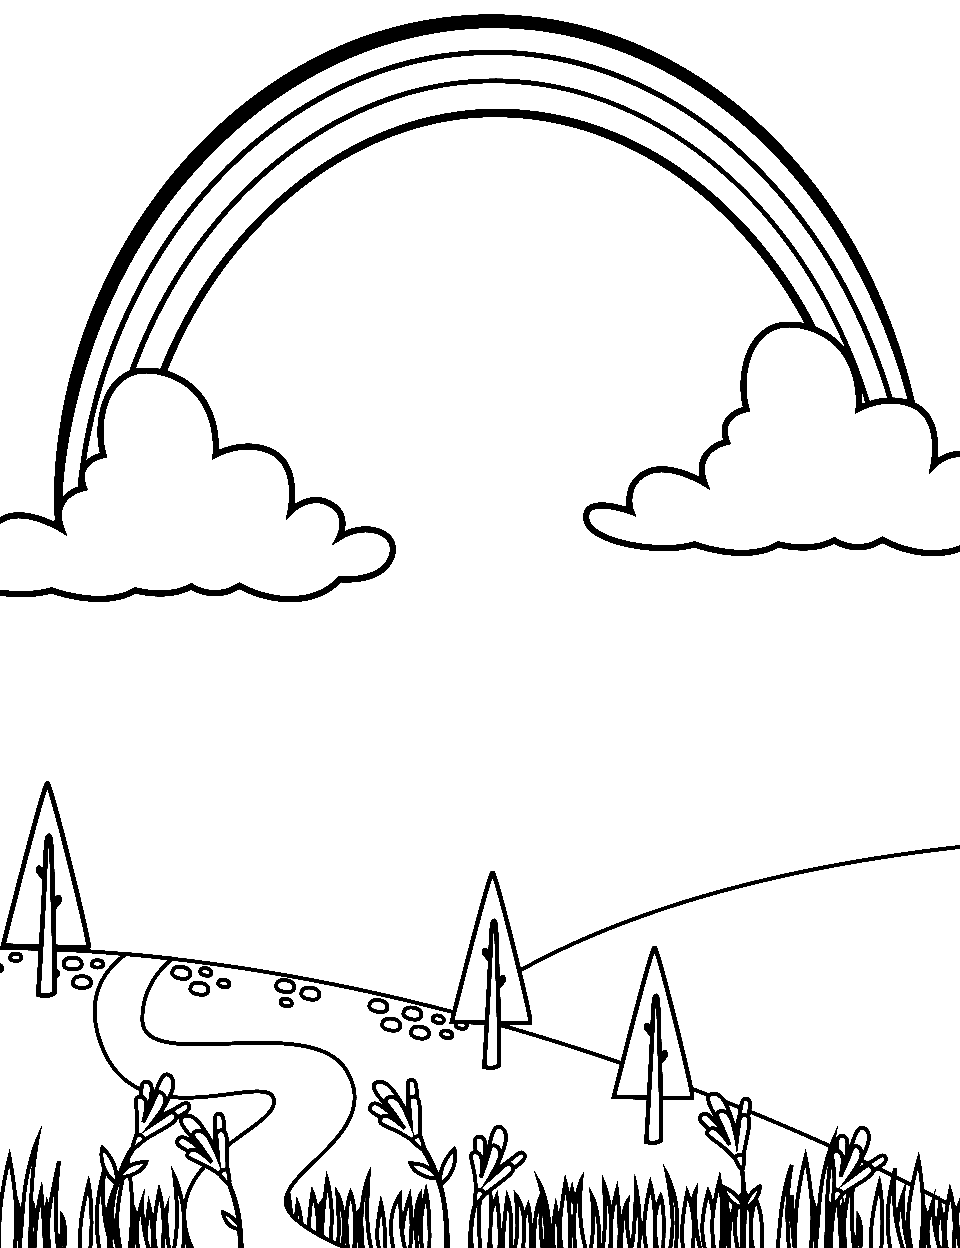 Rainbow Arching Over Field Coloring Page - A vast field with a bright rainbow curving overhead.